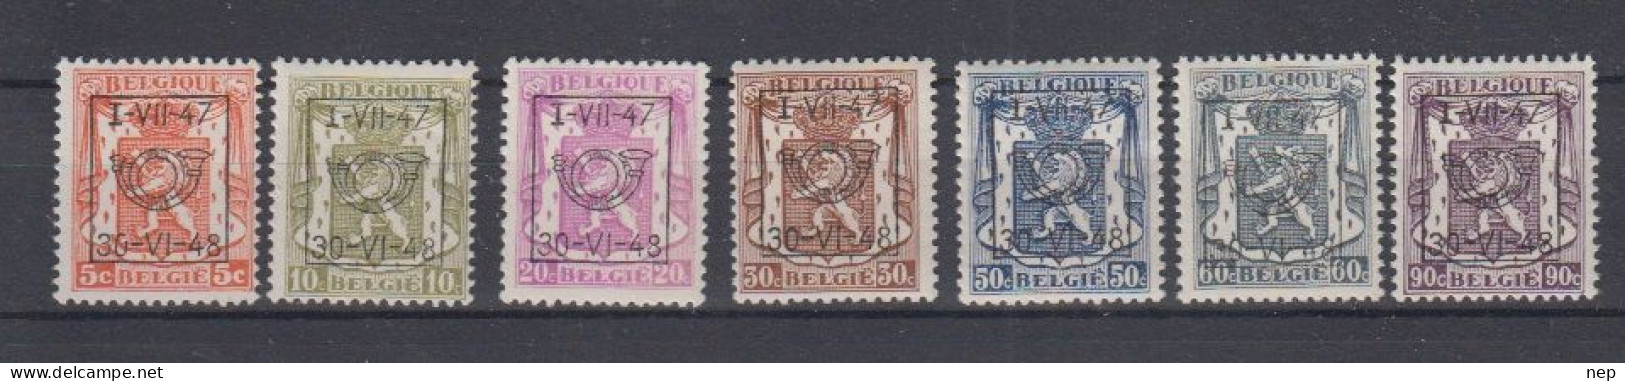 BELGIË - OBP - 1947 - PRE 567/73 (33 Type C) - MNH** - Typo Precancels 1936-51 (Small Seal Of The State)